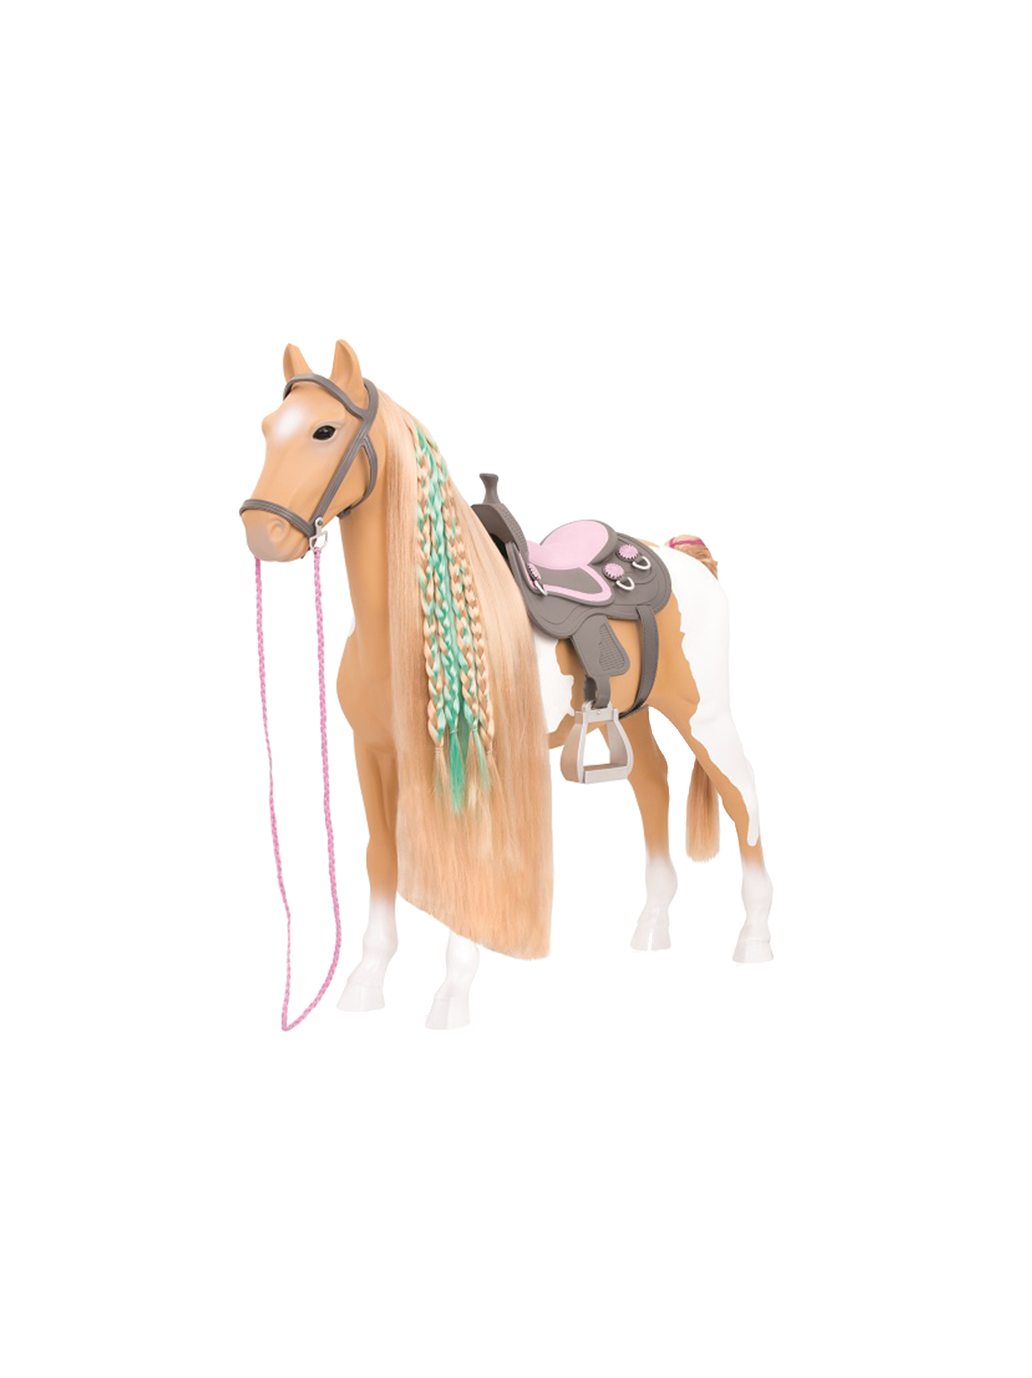 Large 50 cm Palomino horse with accessories